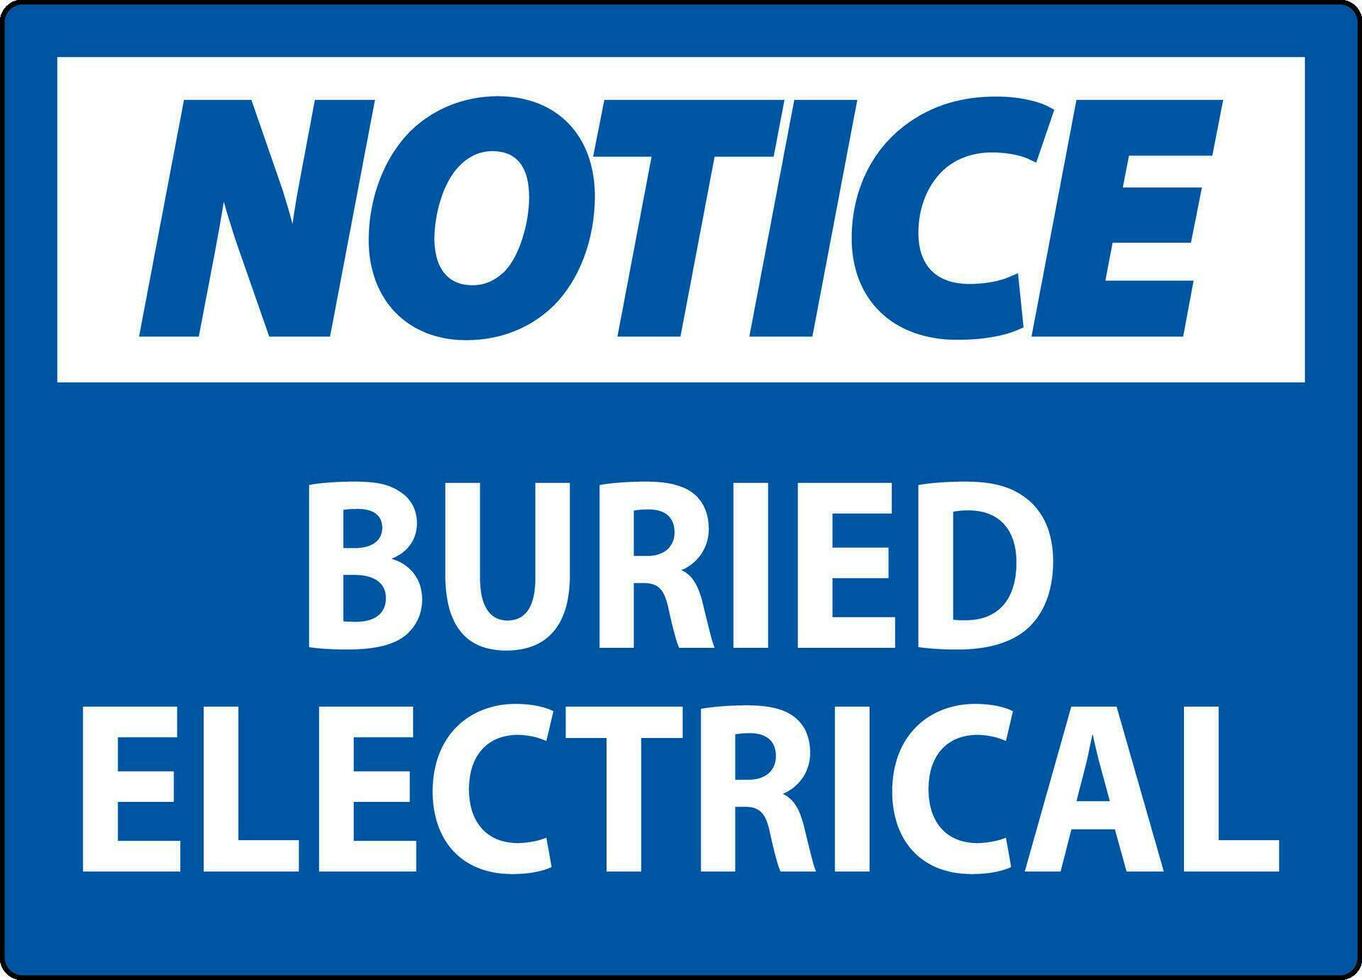 Notice Sign Buried Electrical On White Bacground vector